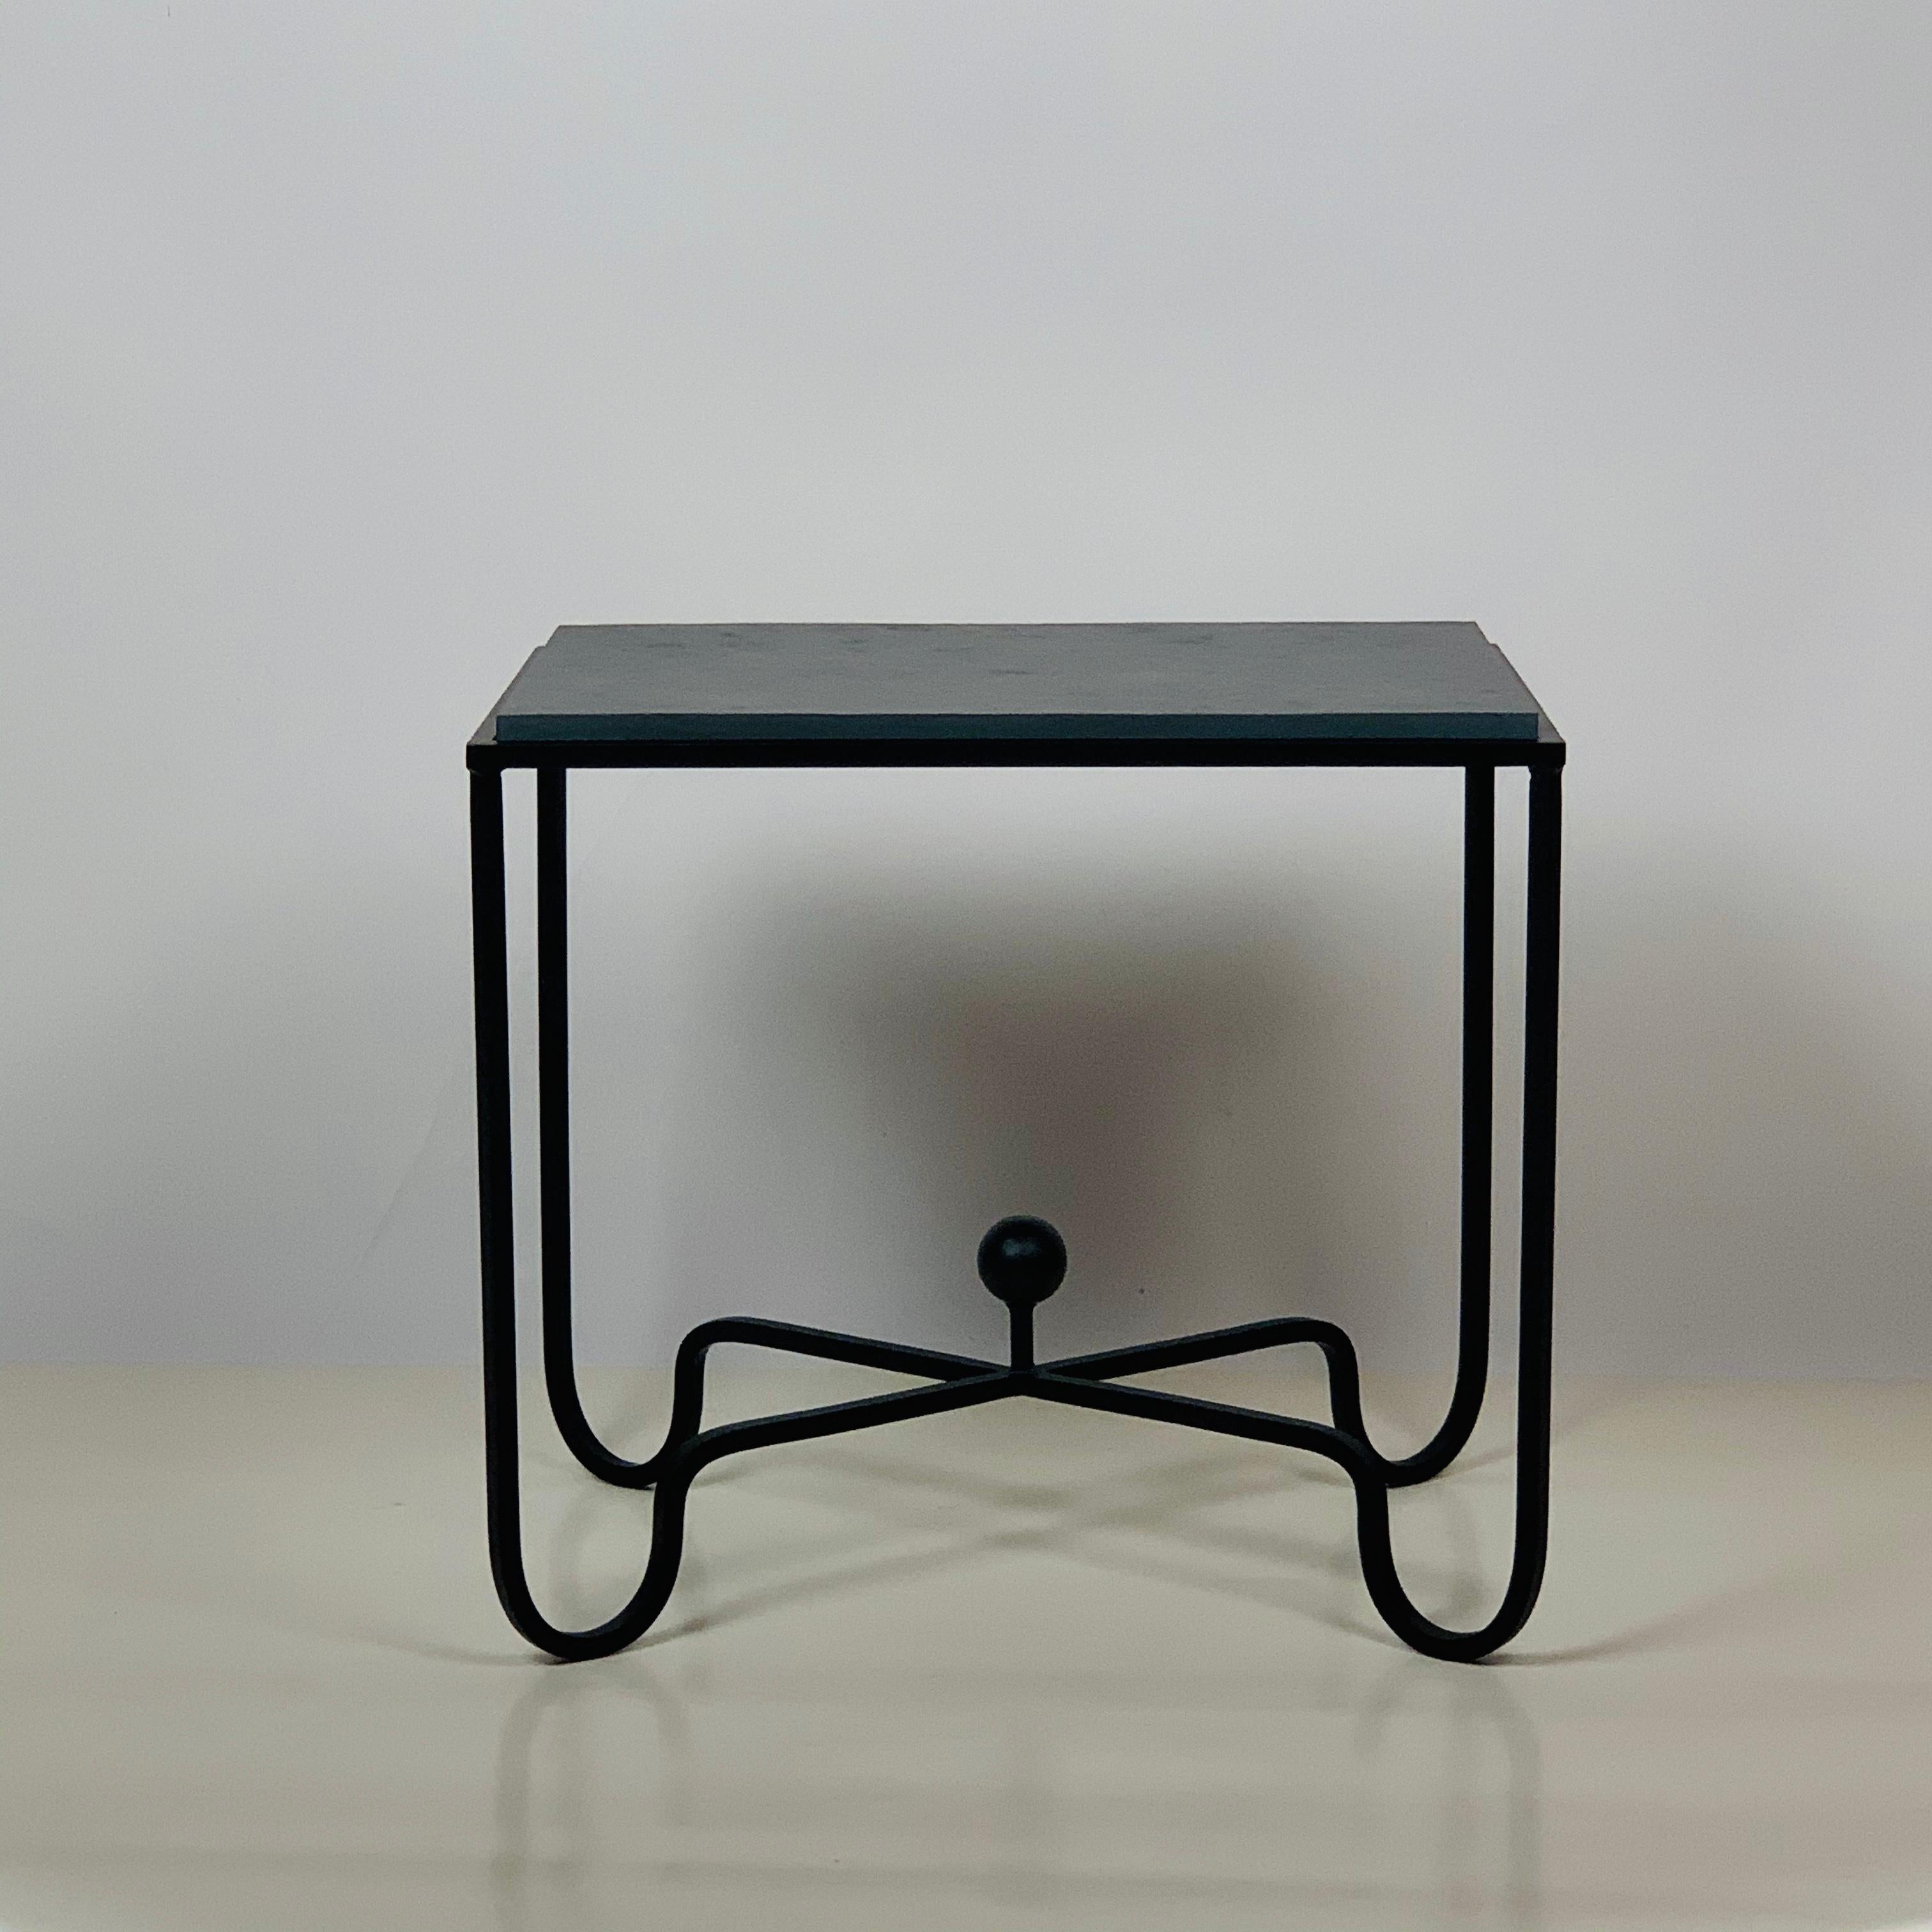 Chic grey slate 'Entretoise' side table by Design Frères.